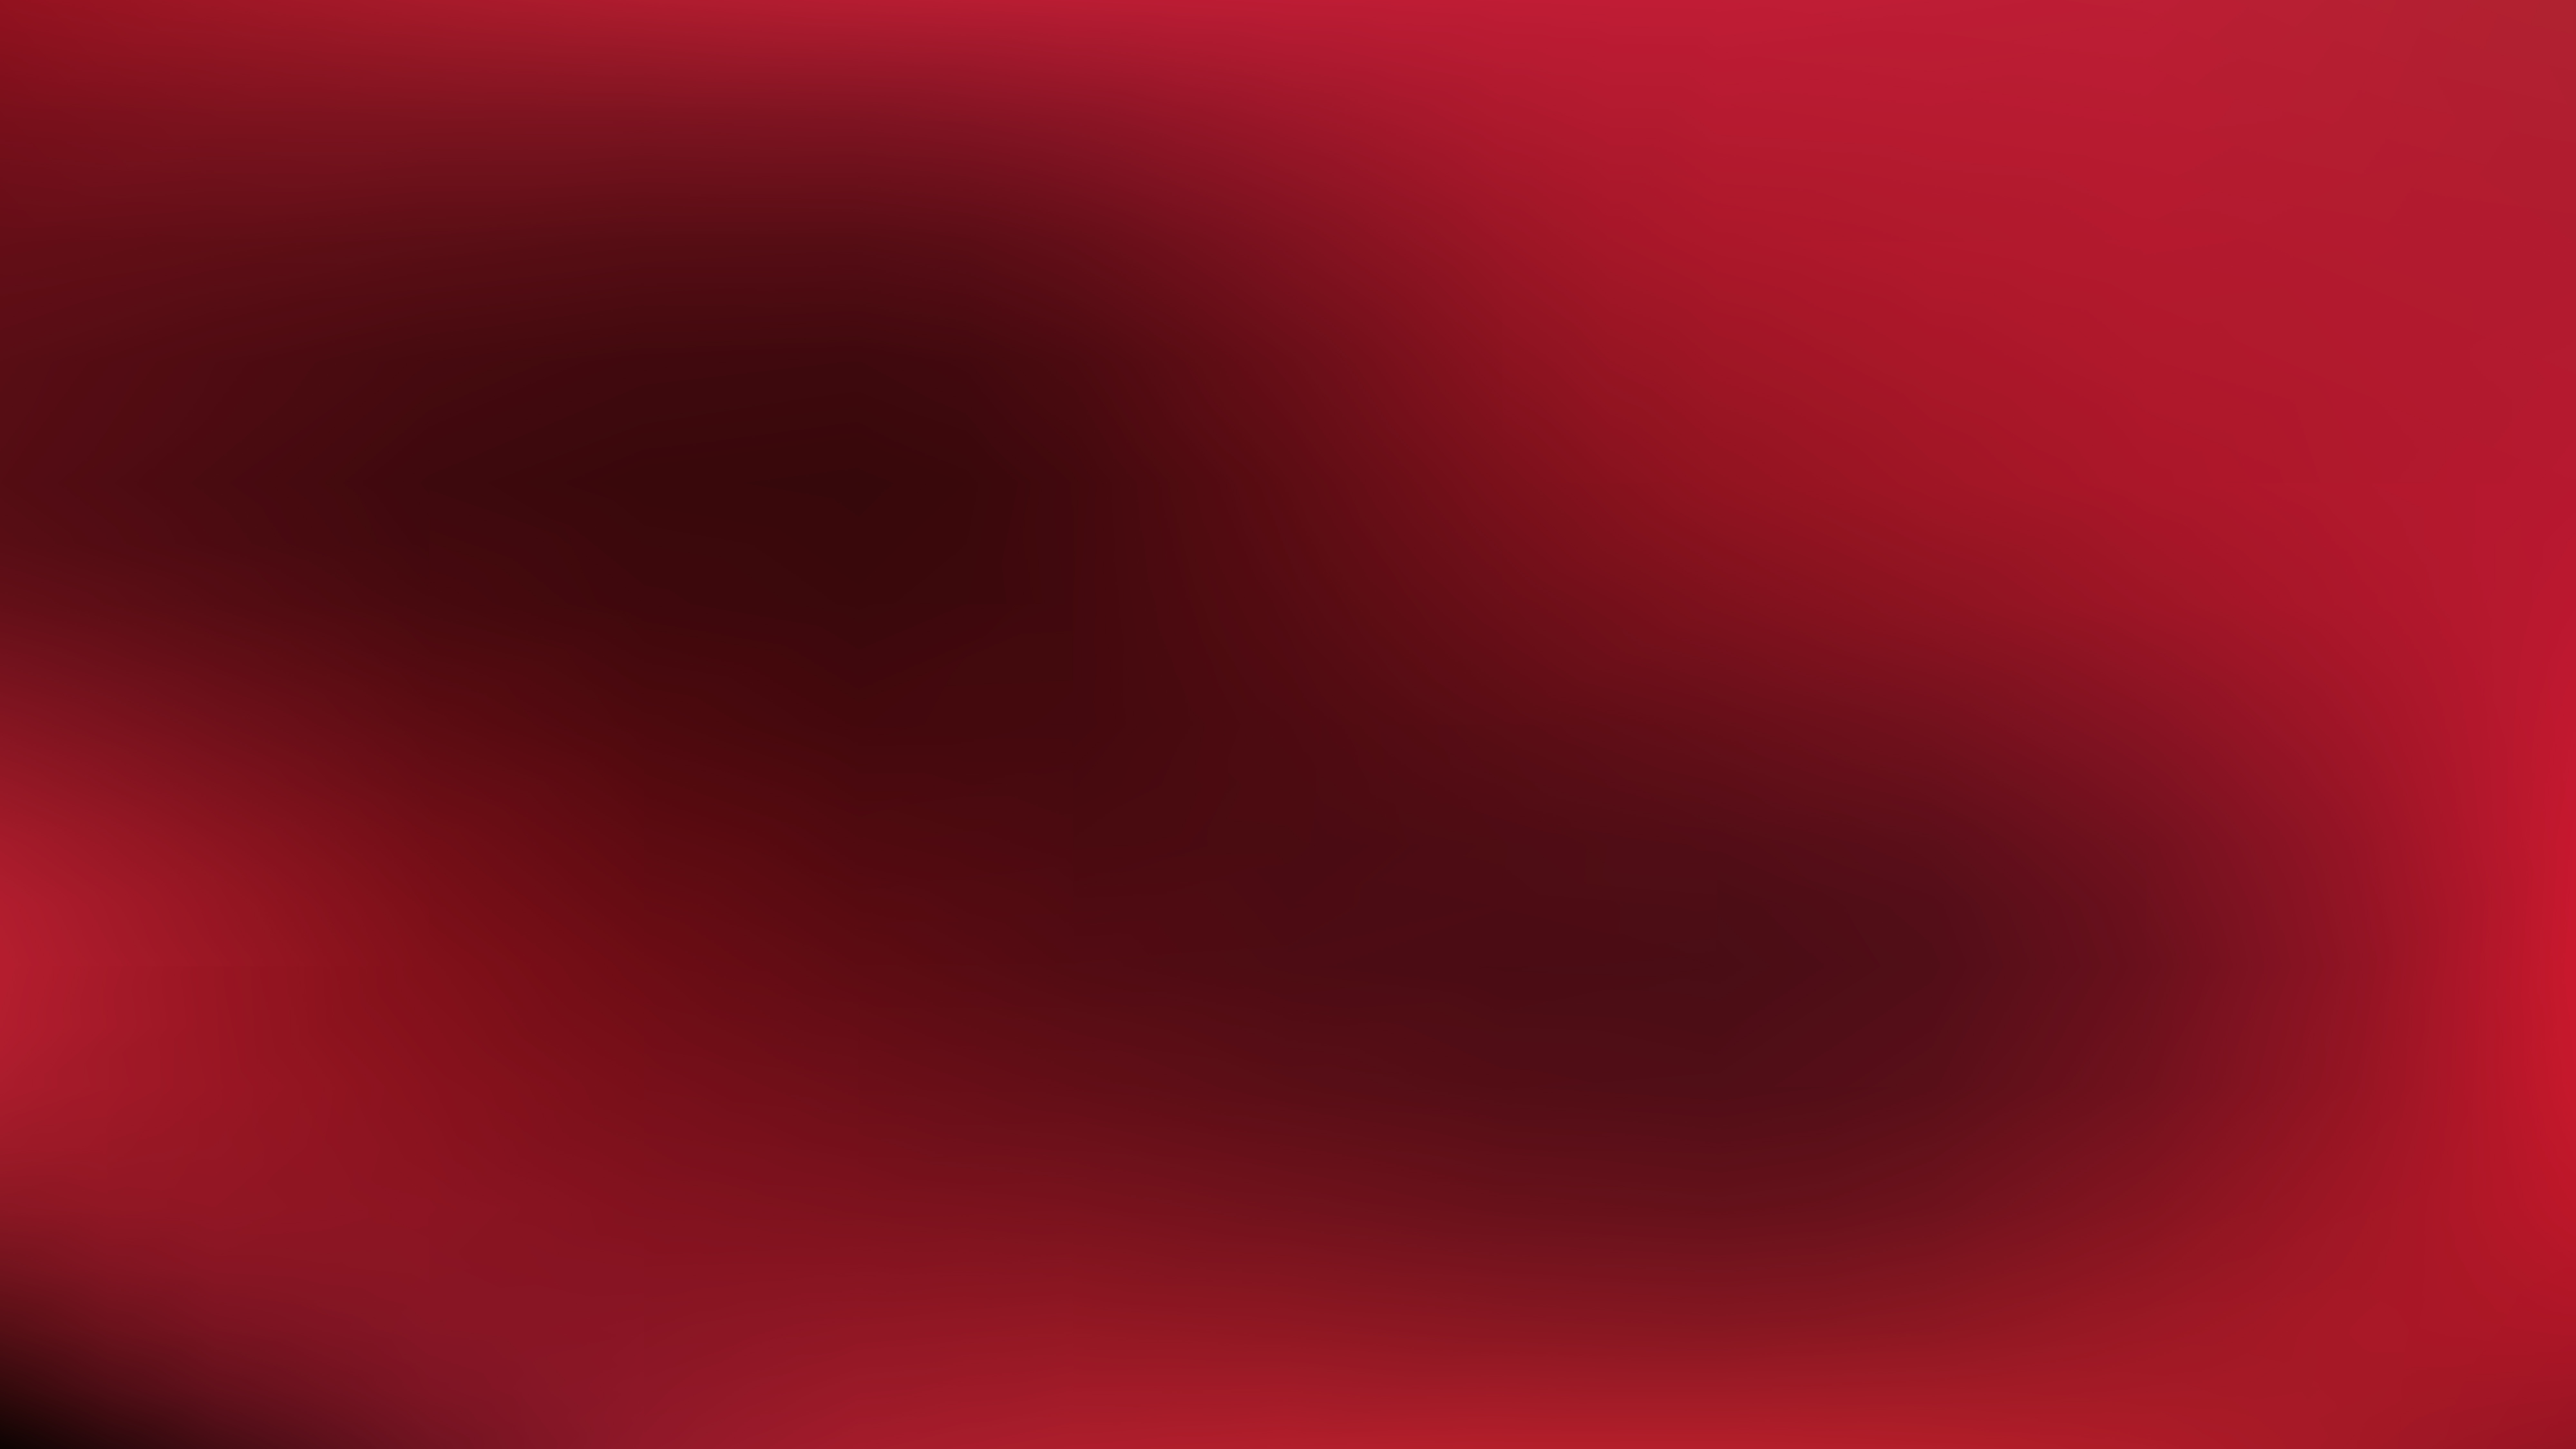 Red And Black Blur Photo Wallpaper Graphic - Black And Red Blur Background  - 8000x4500 Wallpaper 